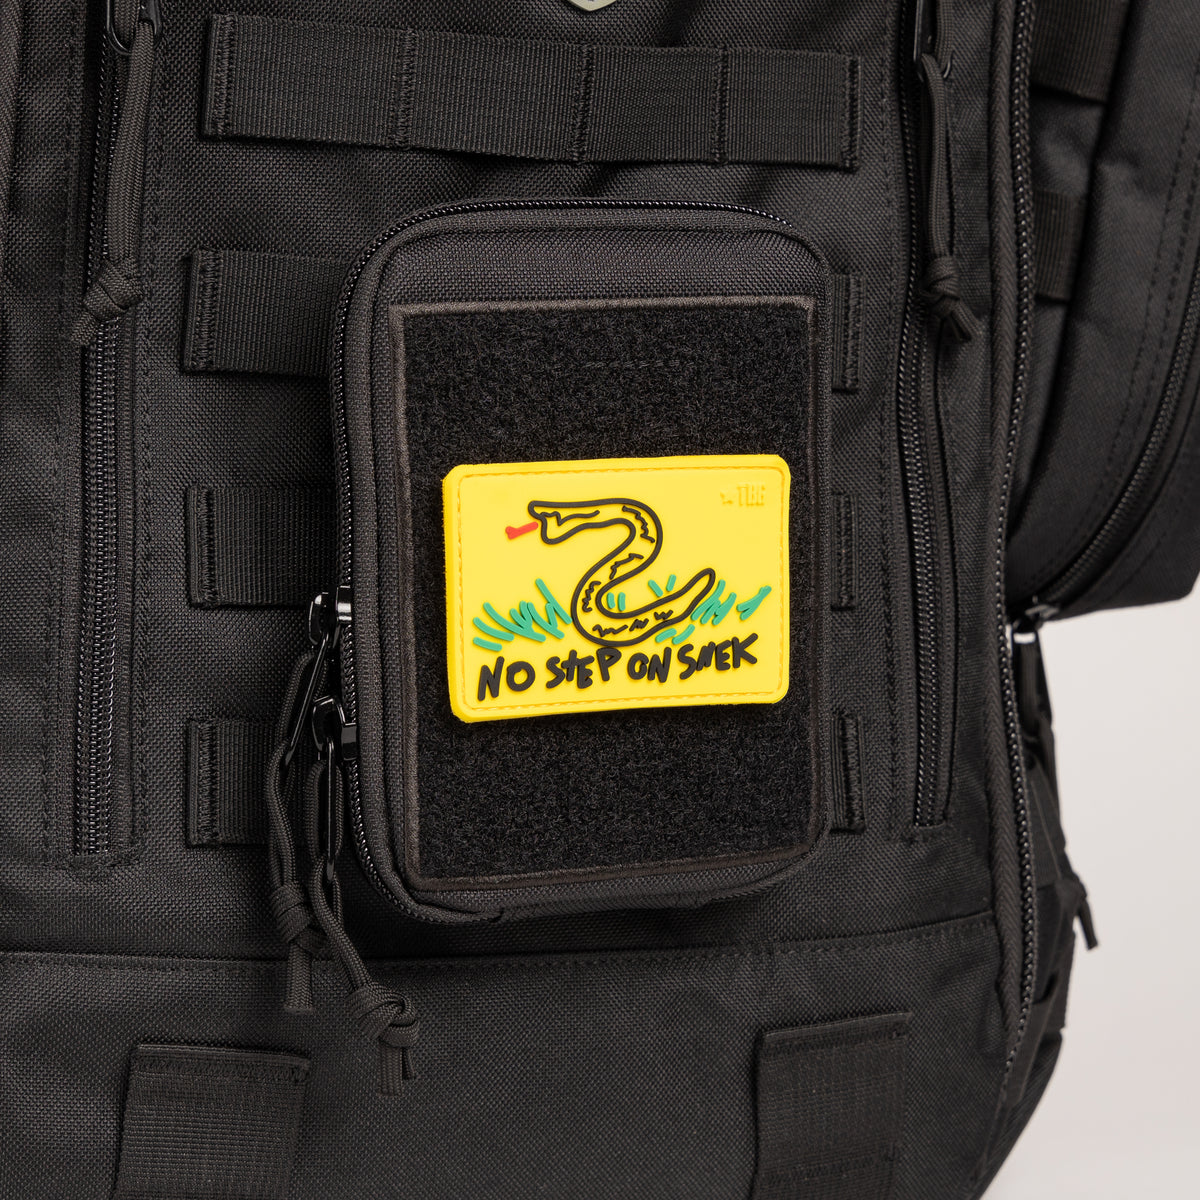 No Step On Snek Tactical PVC Patch No Step On Snek Badge Sew On Patches  Hook-Back Adhesion